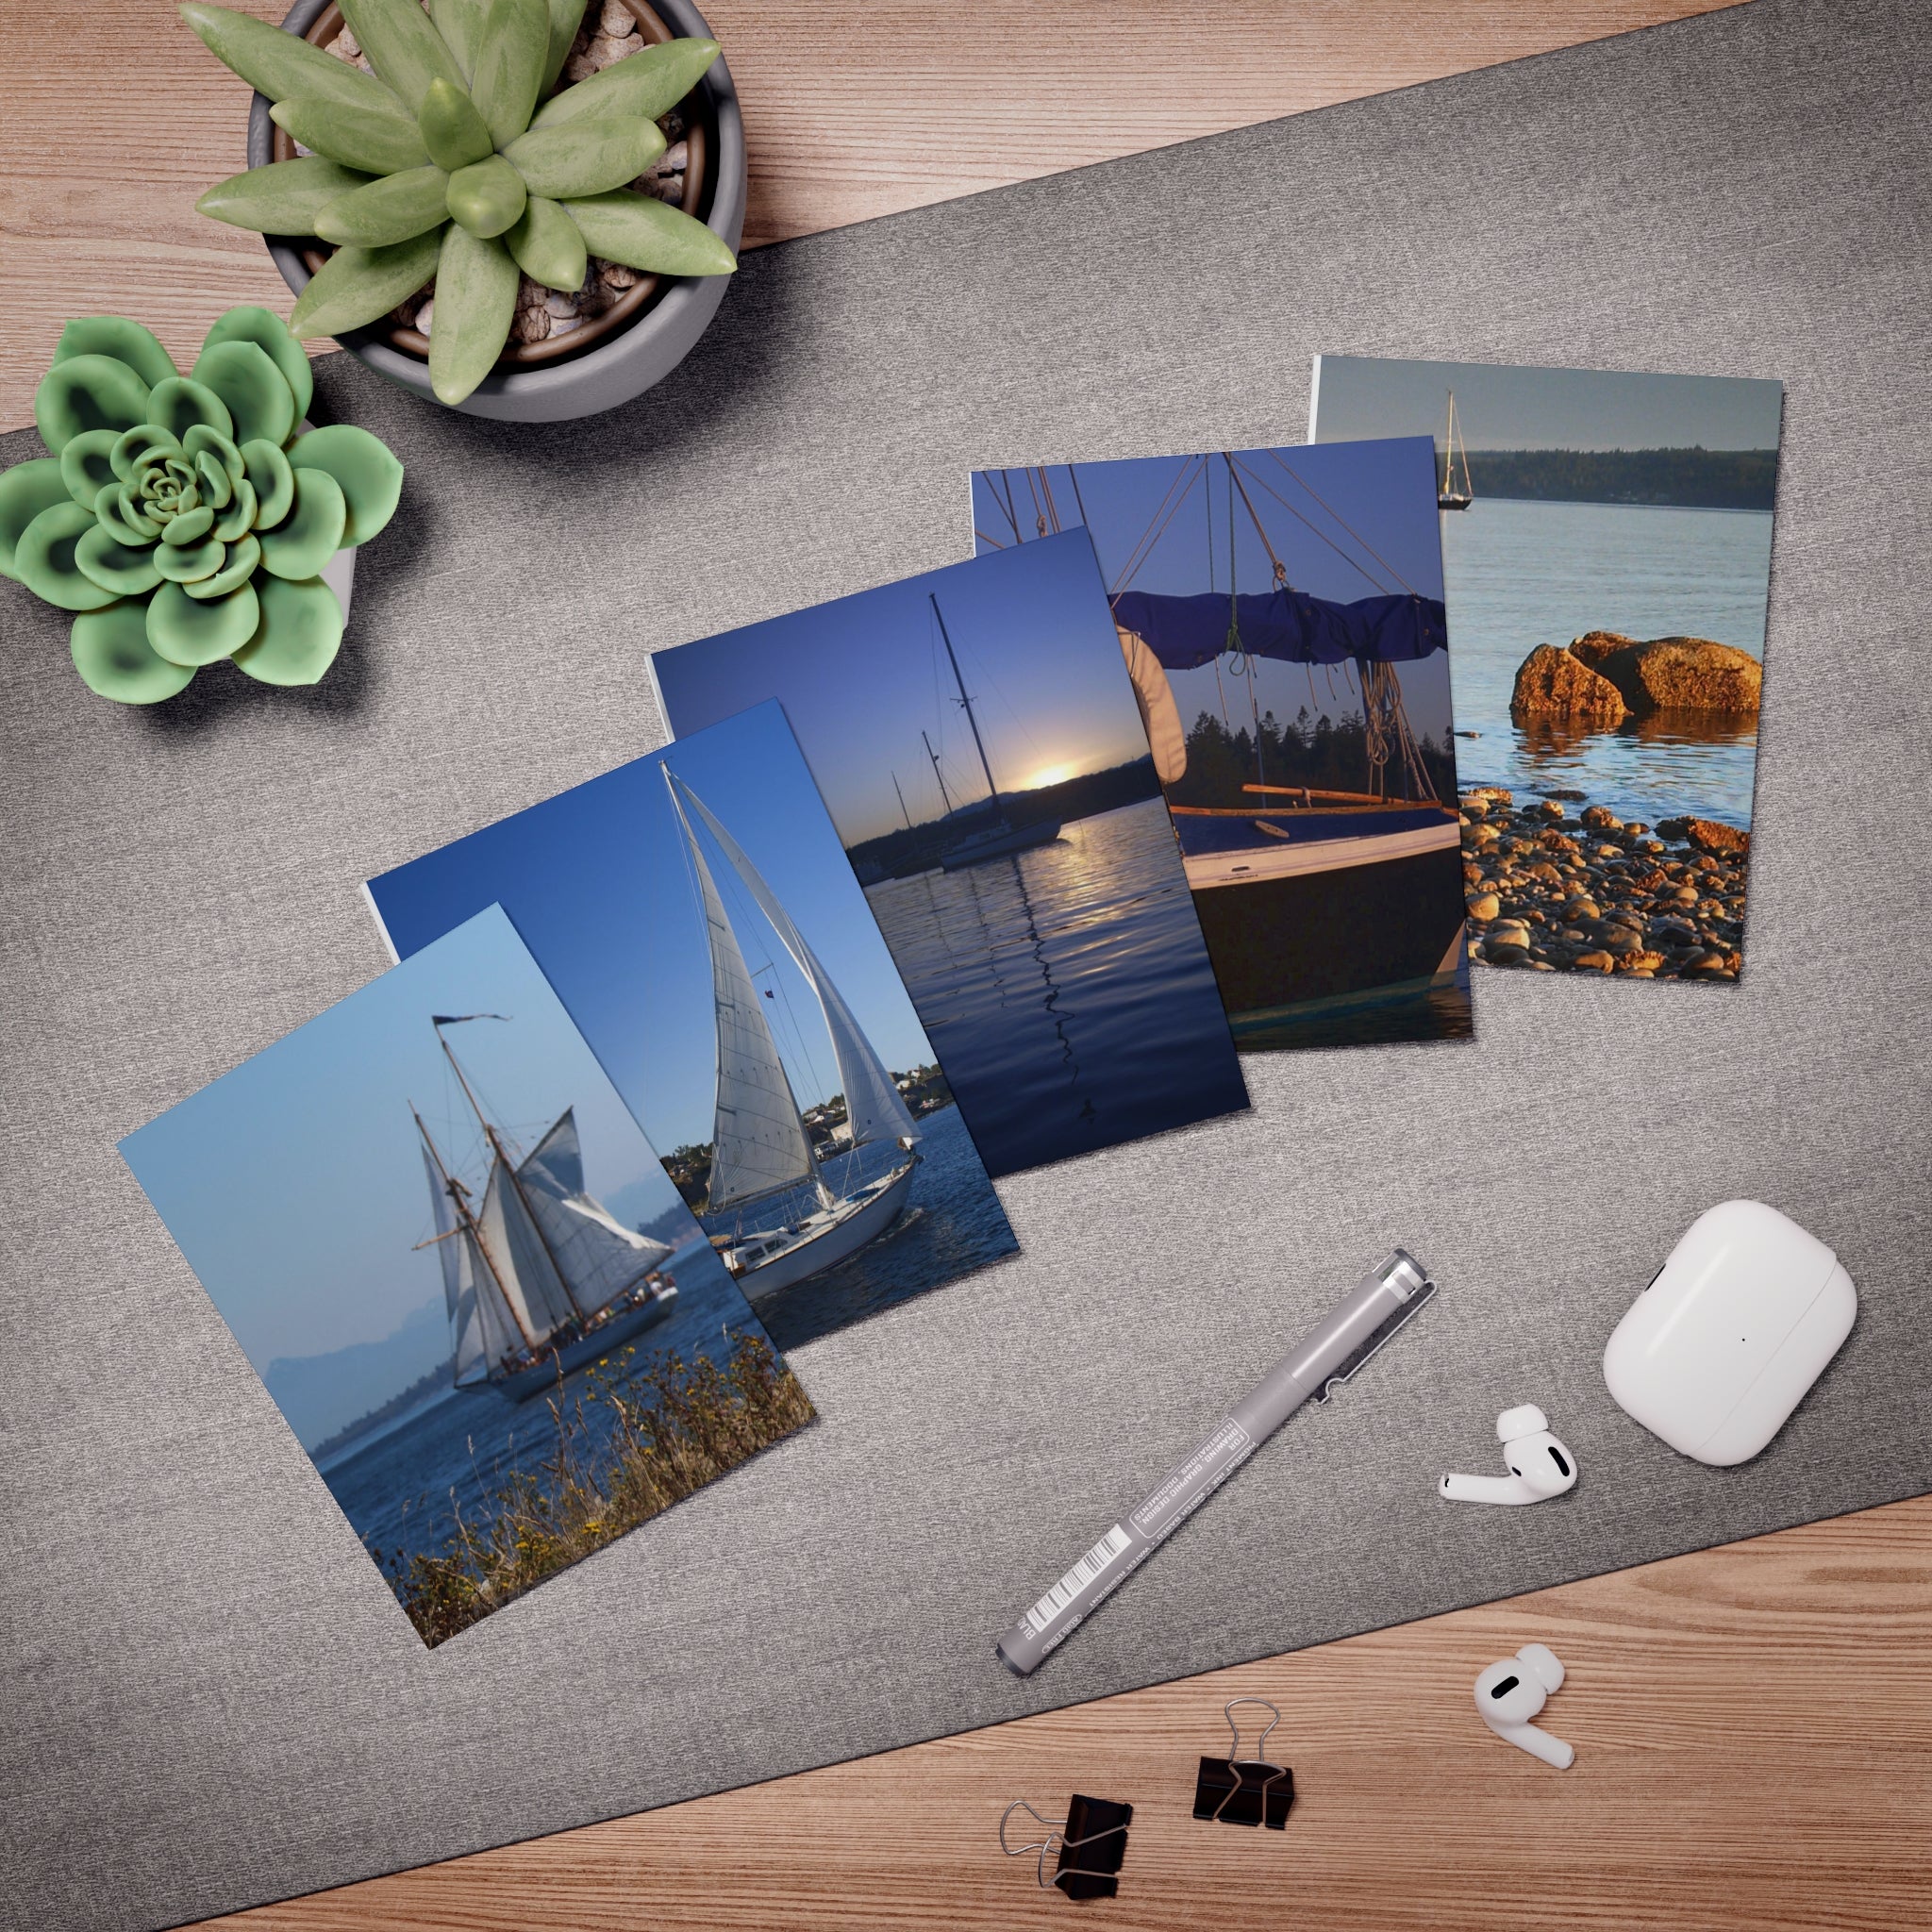 Sea & Sail Note Cards (5-Pack of sailing inspired personal cards)